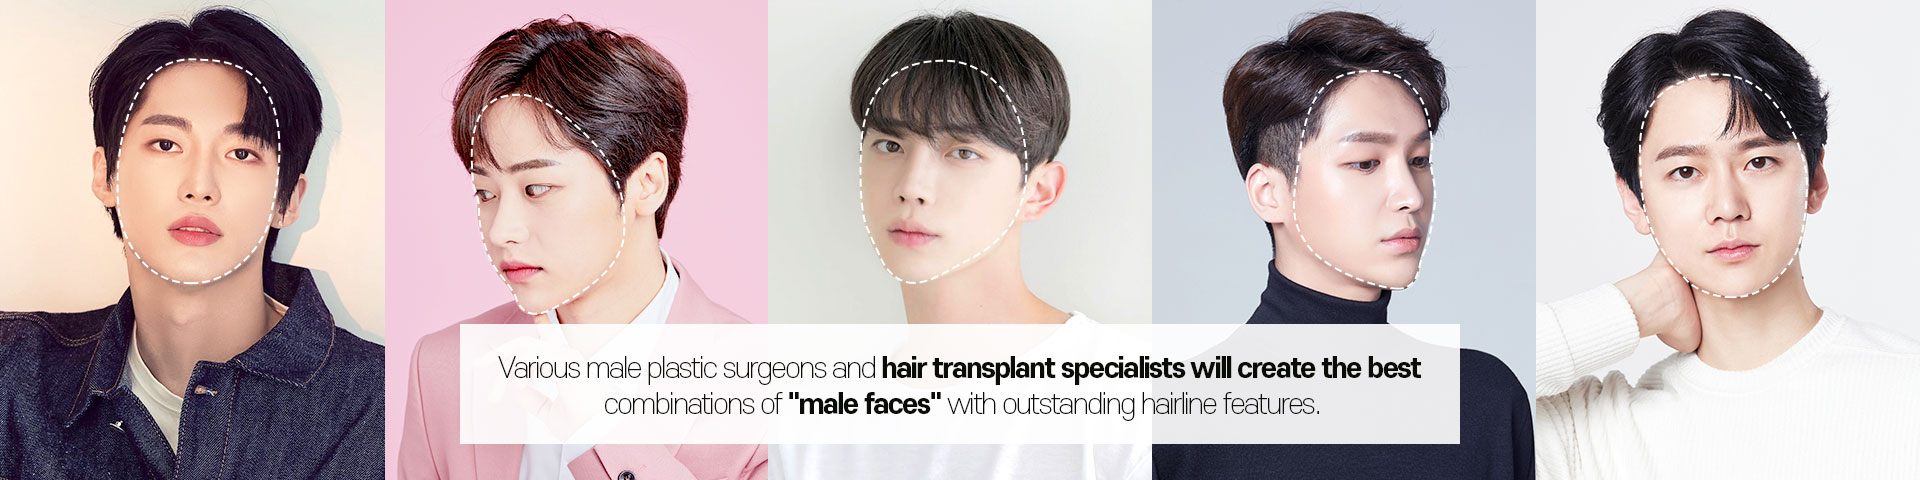 Various male plastic surgeons and hair transplant specialists will create the best combinations of male faces with outstanding hairline features